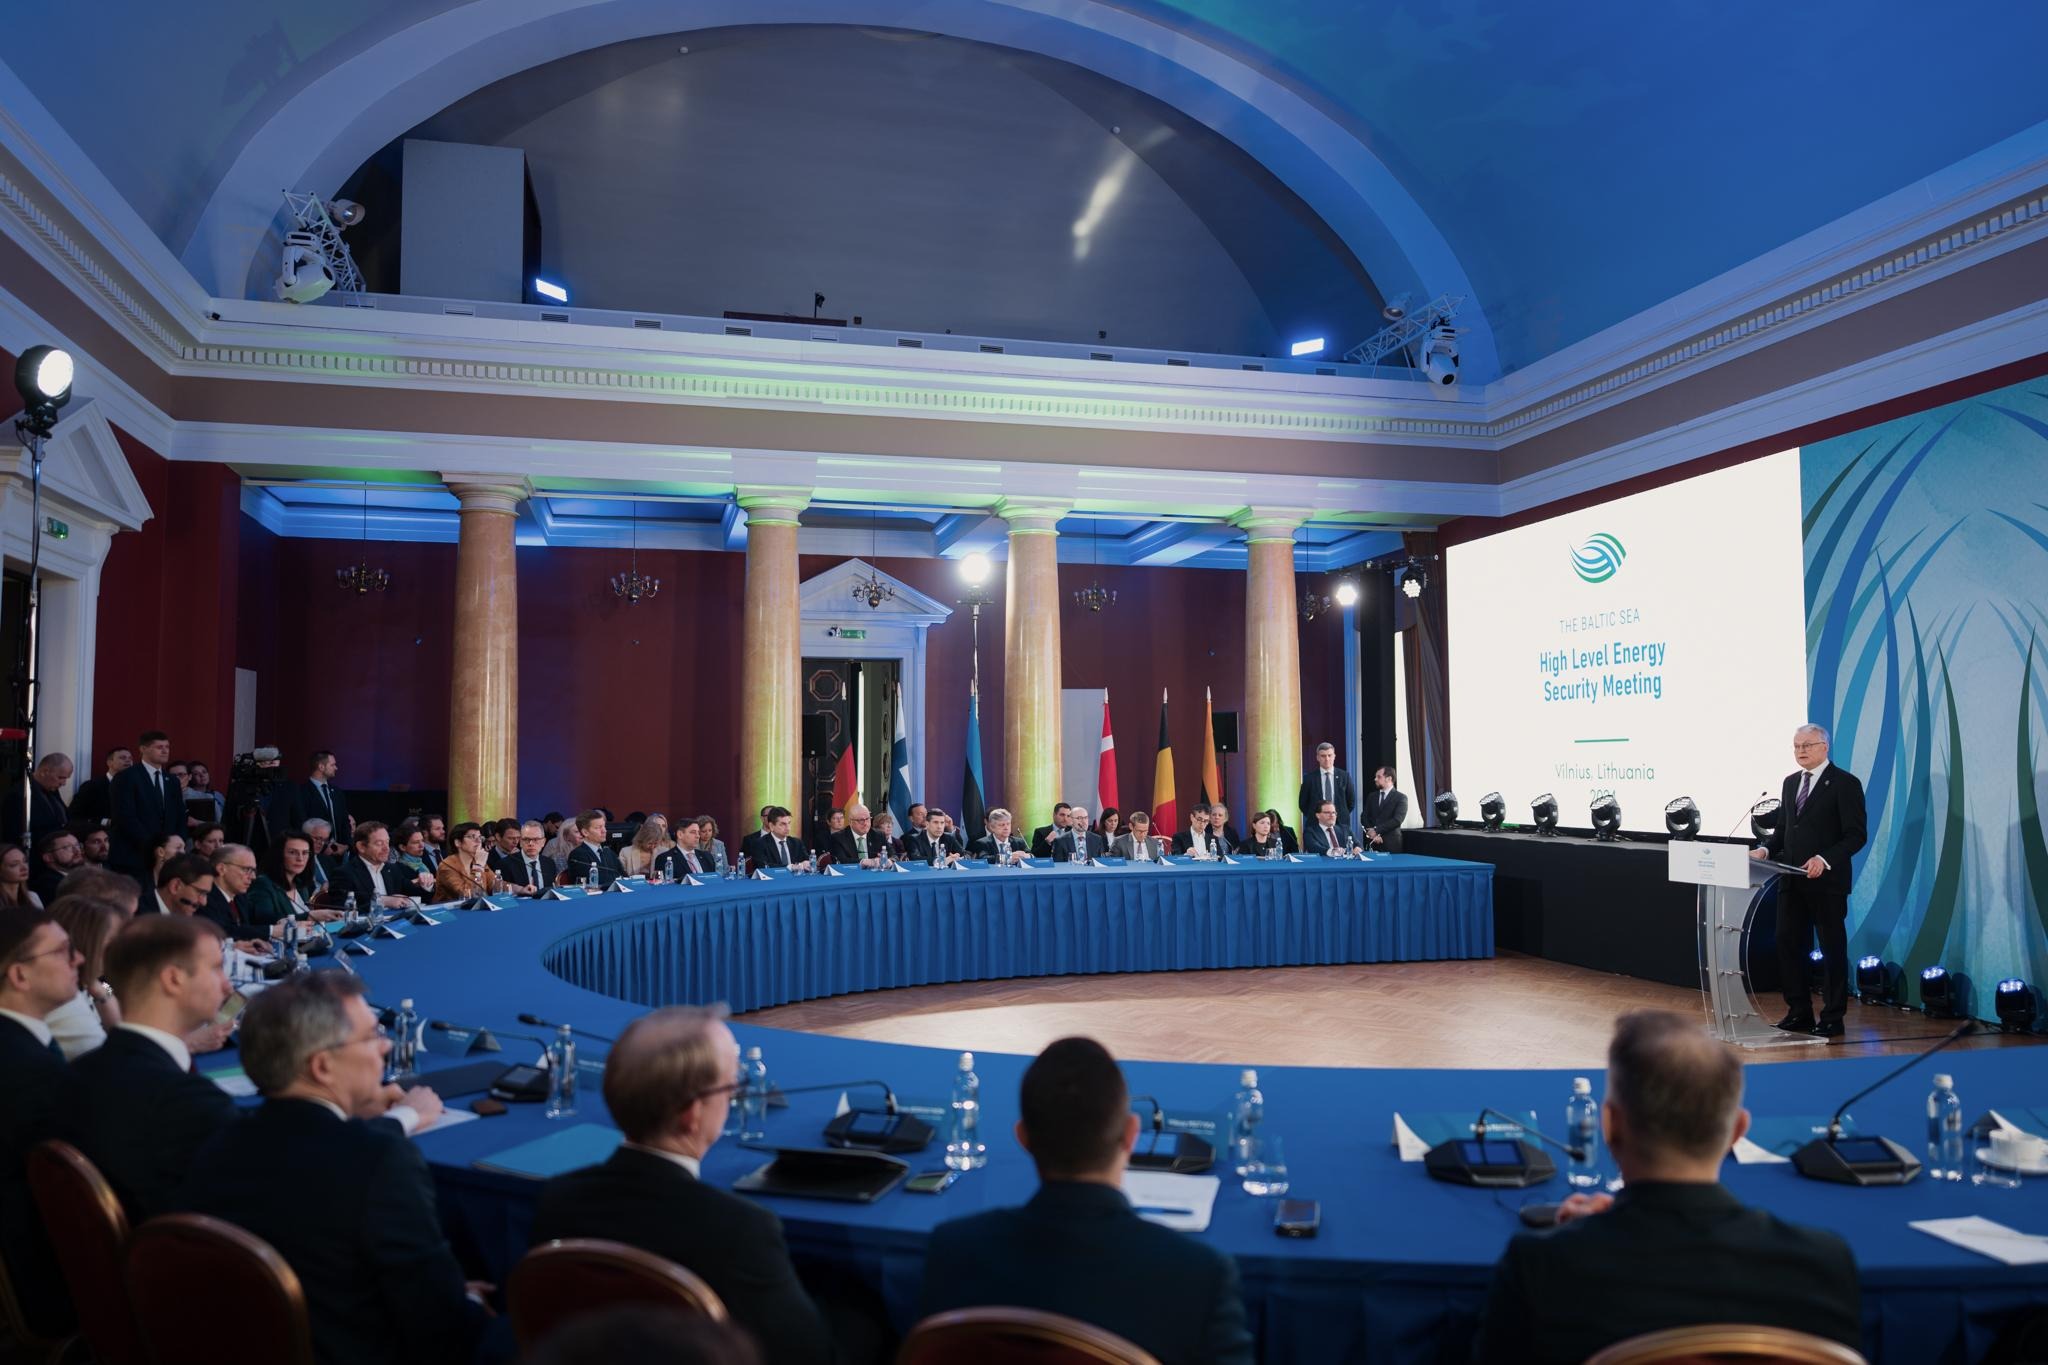 The Baltic Sea High Level Energy Security Meeting